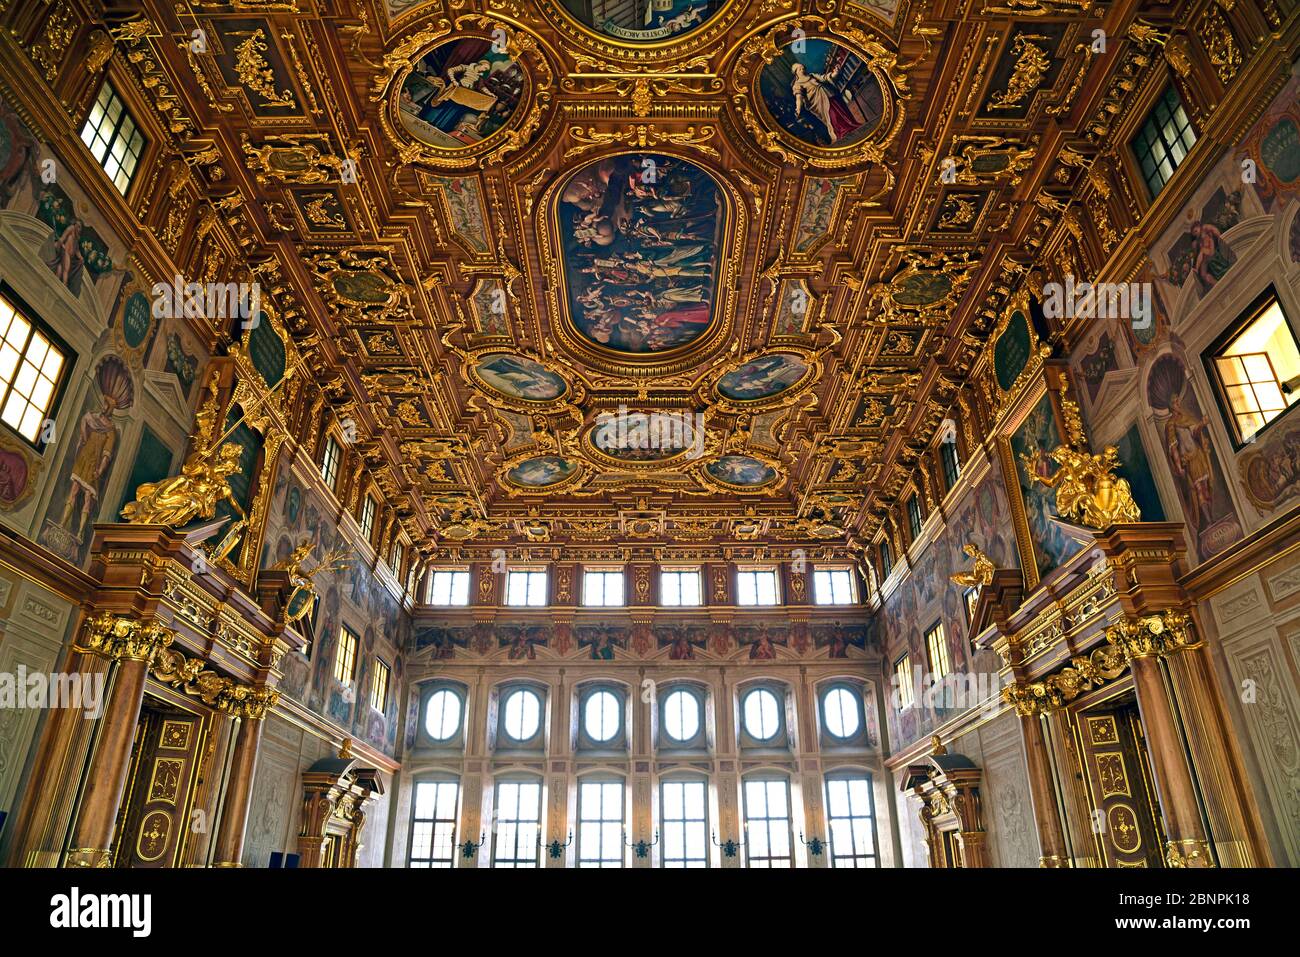 Europe, Germany, Bavaria, Swabia, Augsburg, Rathausmarkt, town hall, Renaissance, built 1615 to 1620, golden hall, view to the ceiling, Stock Photo